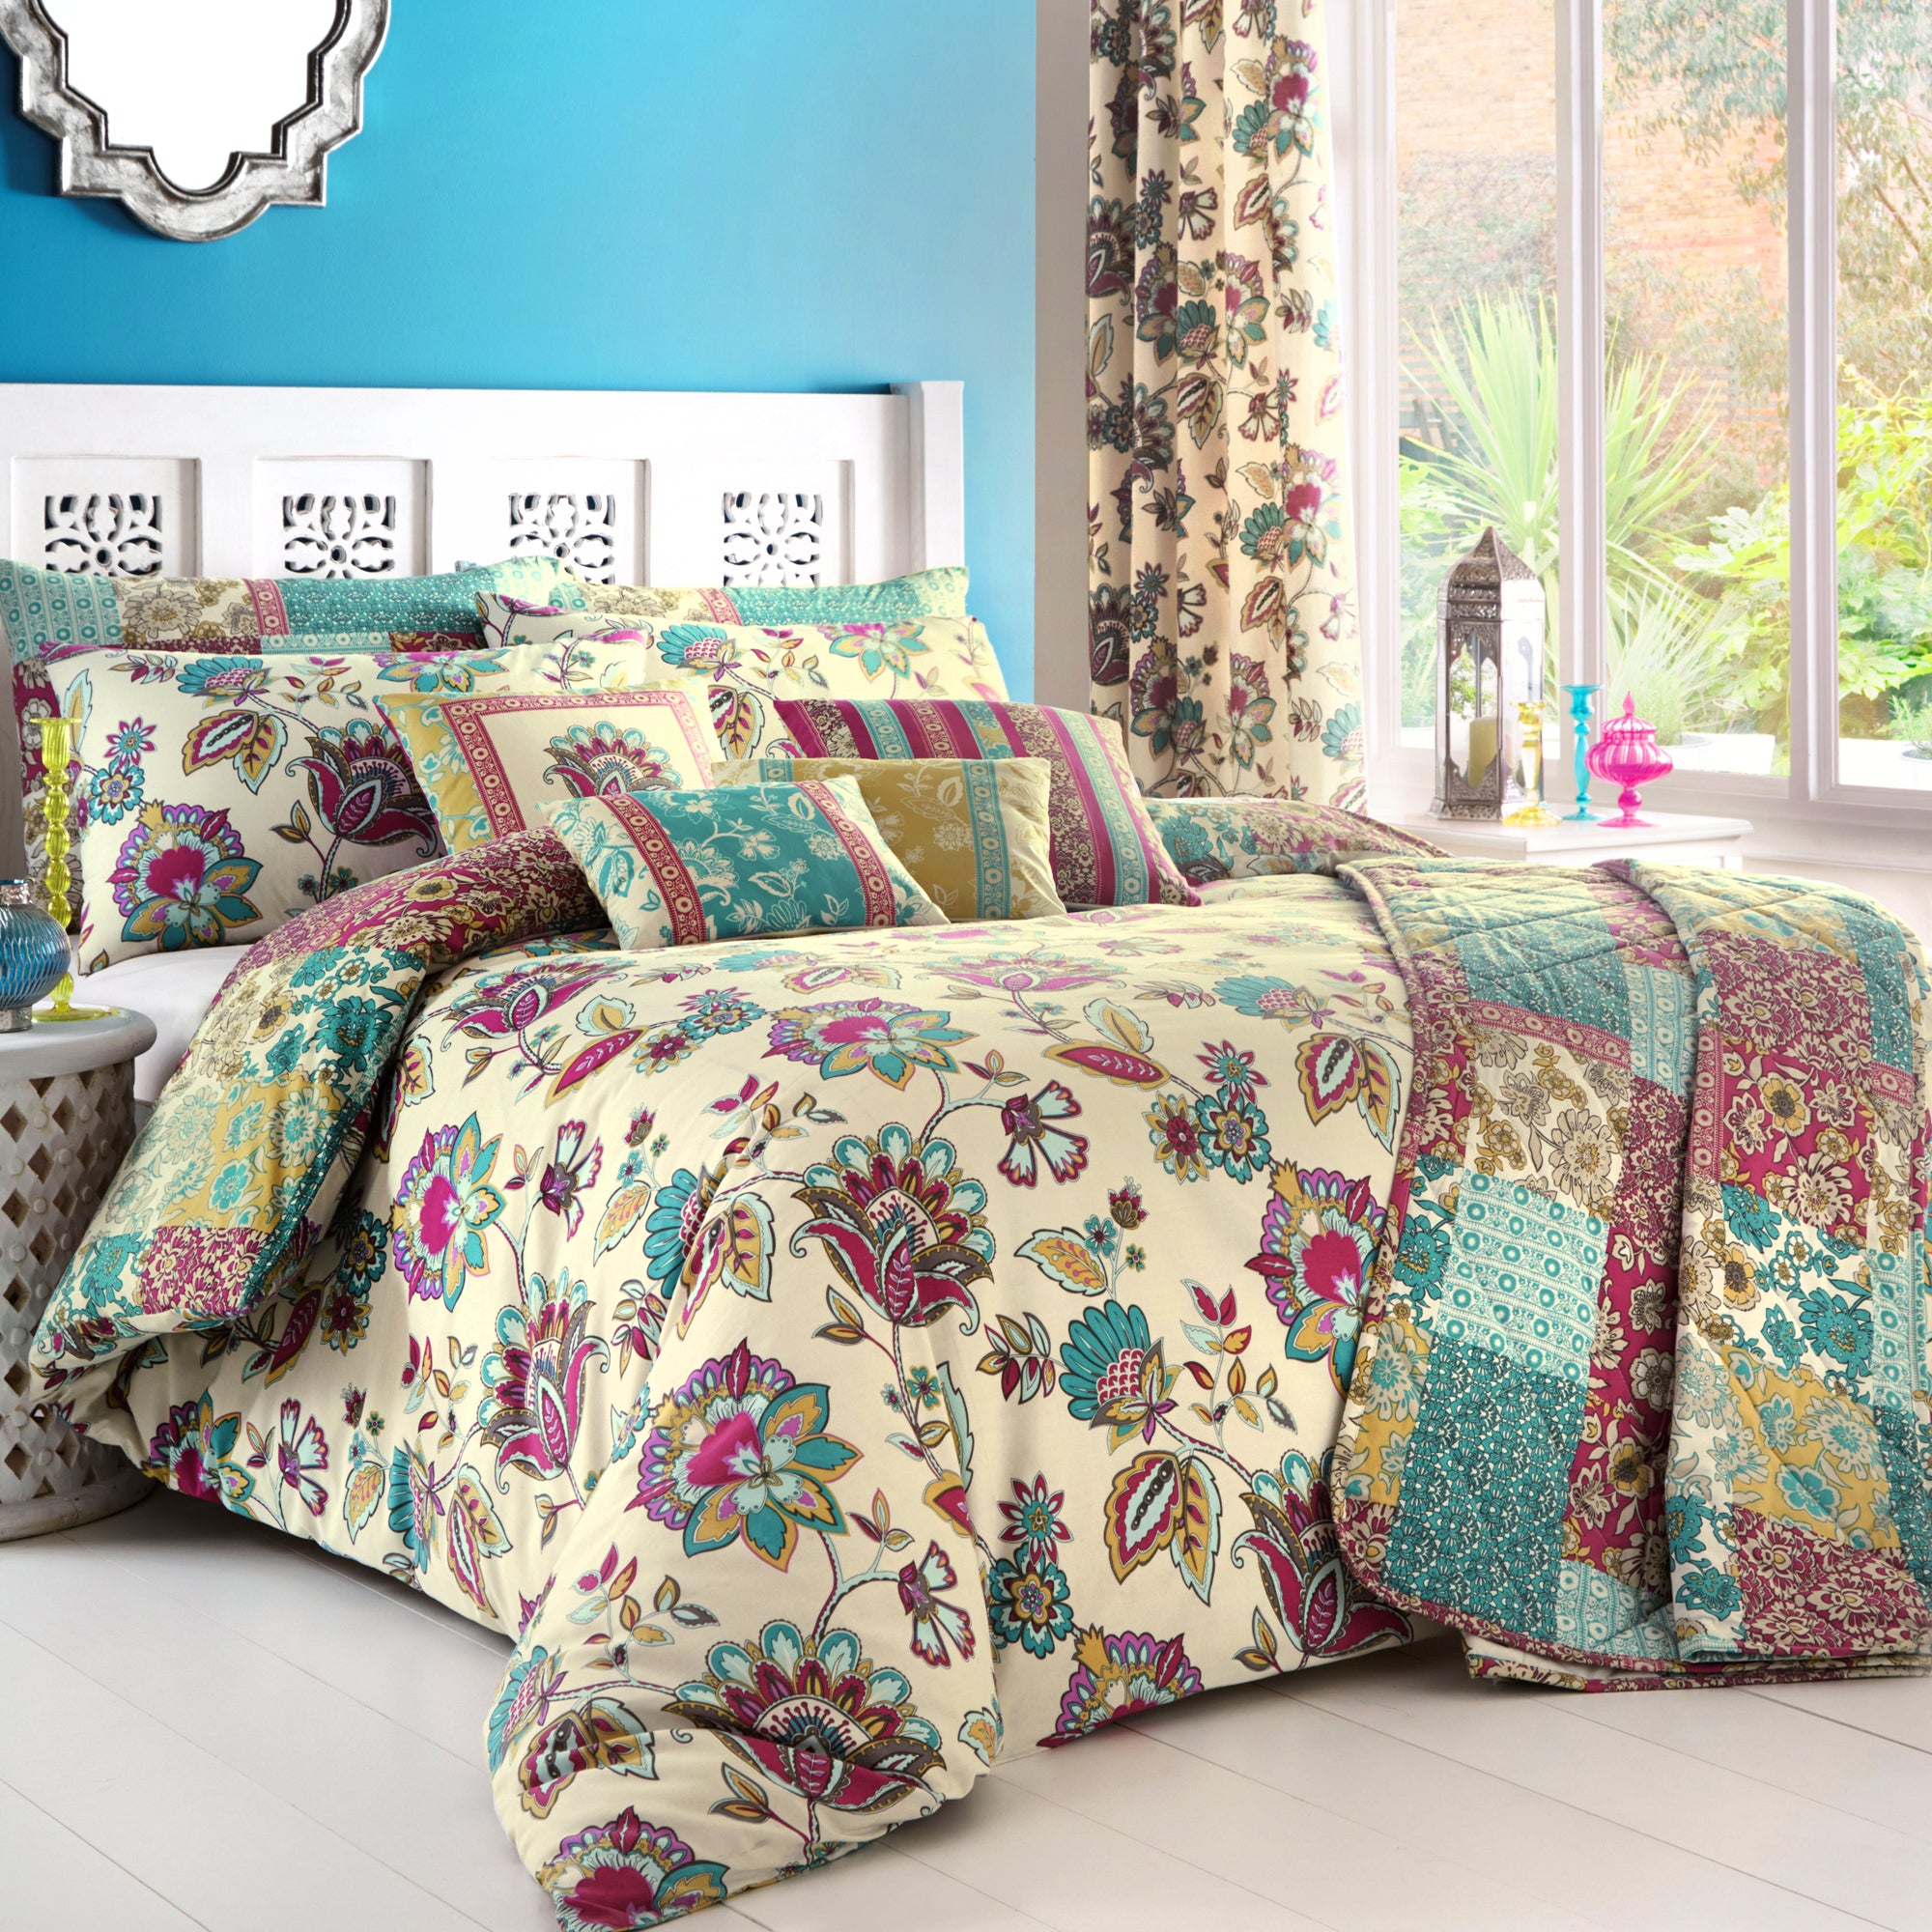 Marinelli - Easy Care Bedding & Curtains in Teal- by Dreams & Drapes